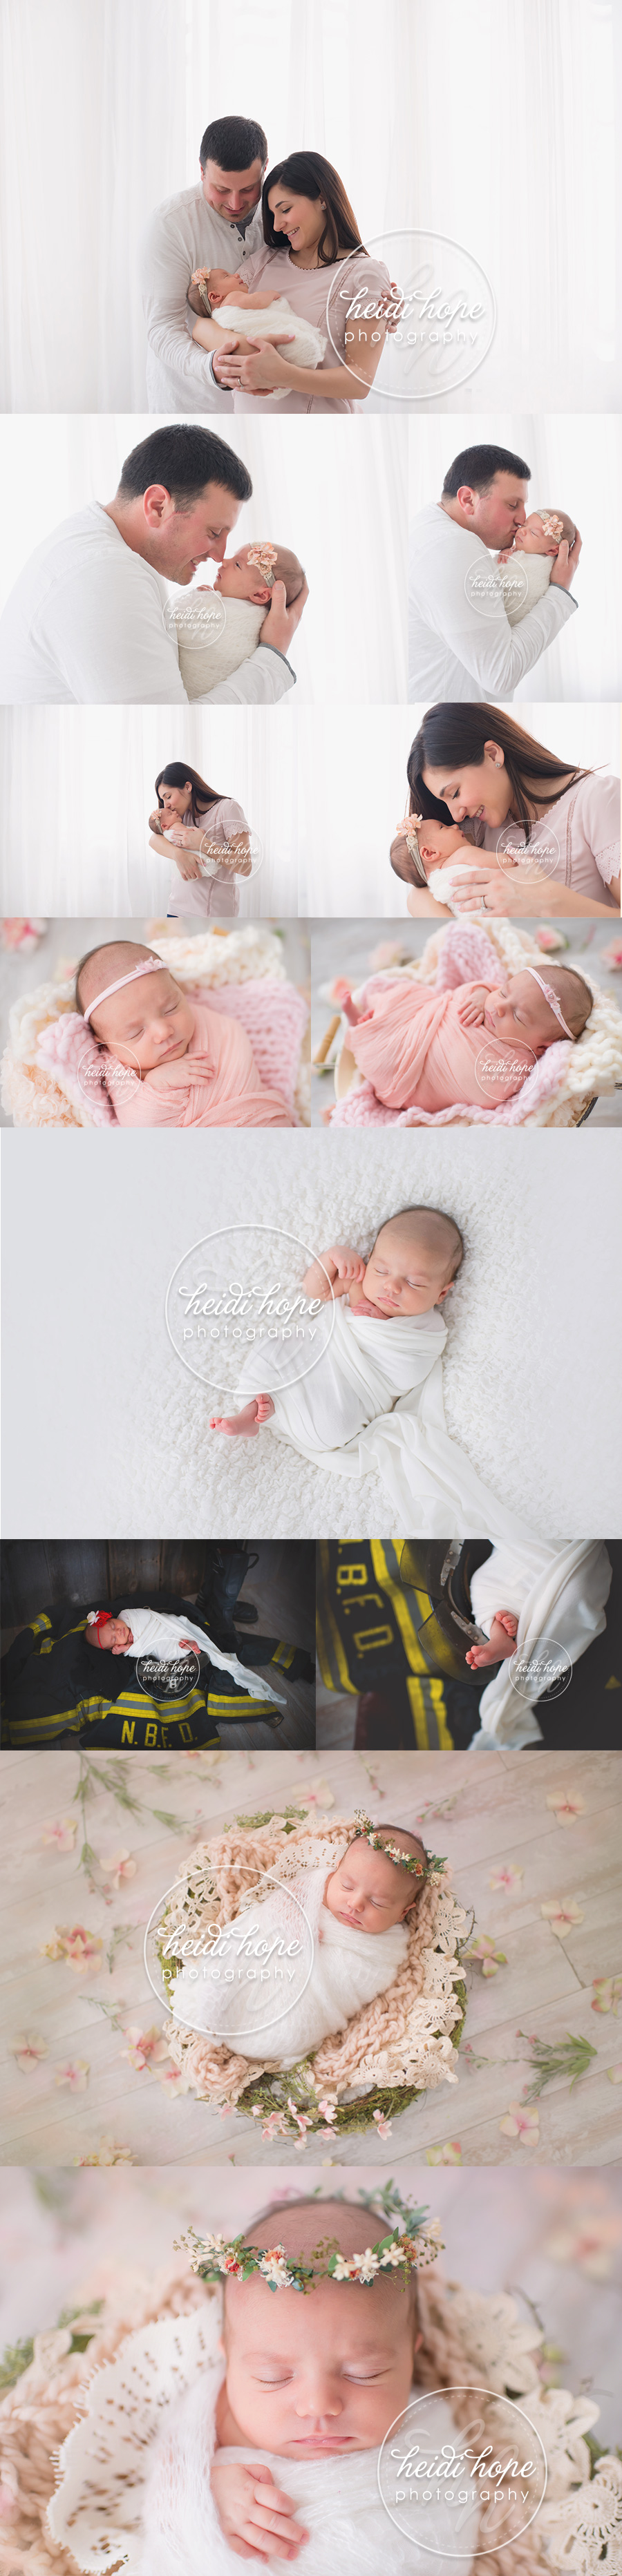 6-week-old-newborn-girl-photography-session-with-parents